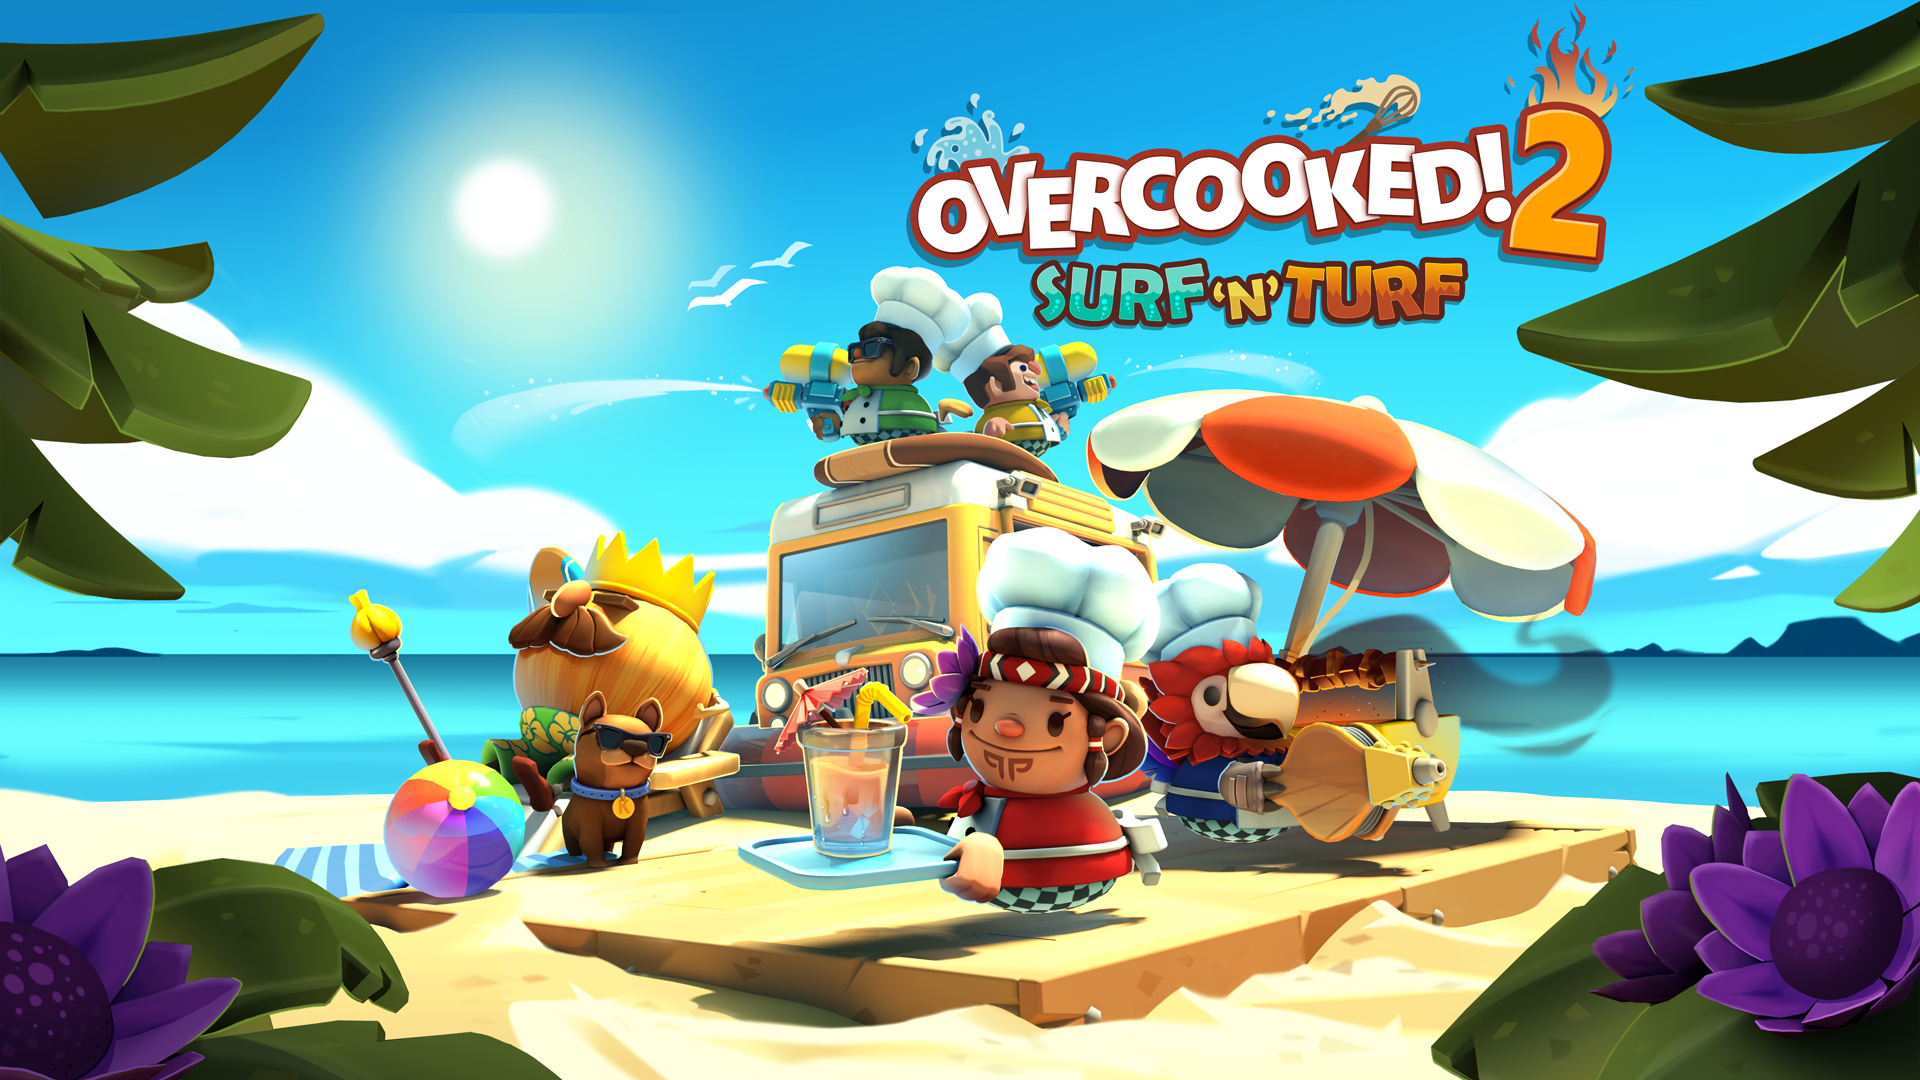 Overcooked! 2 LOW COST